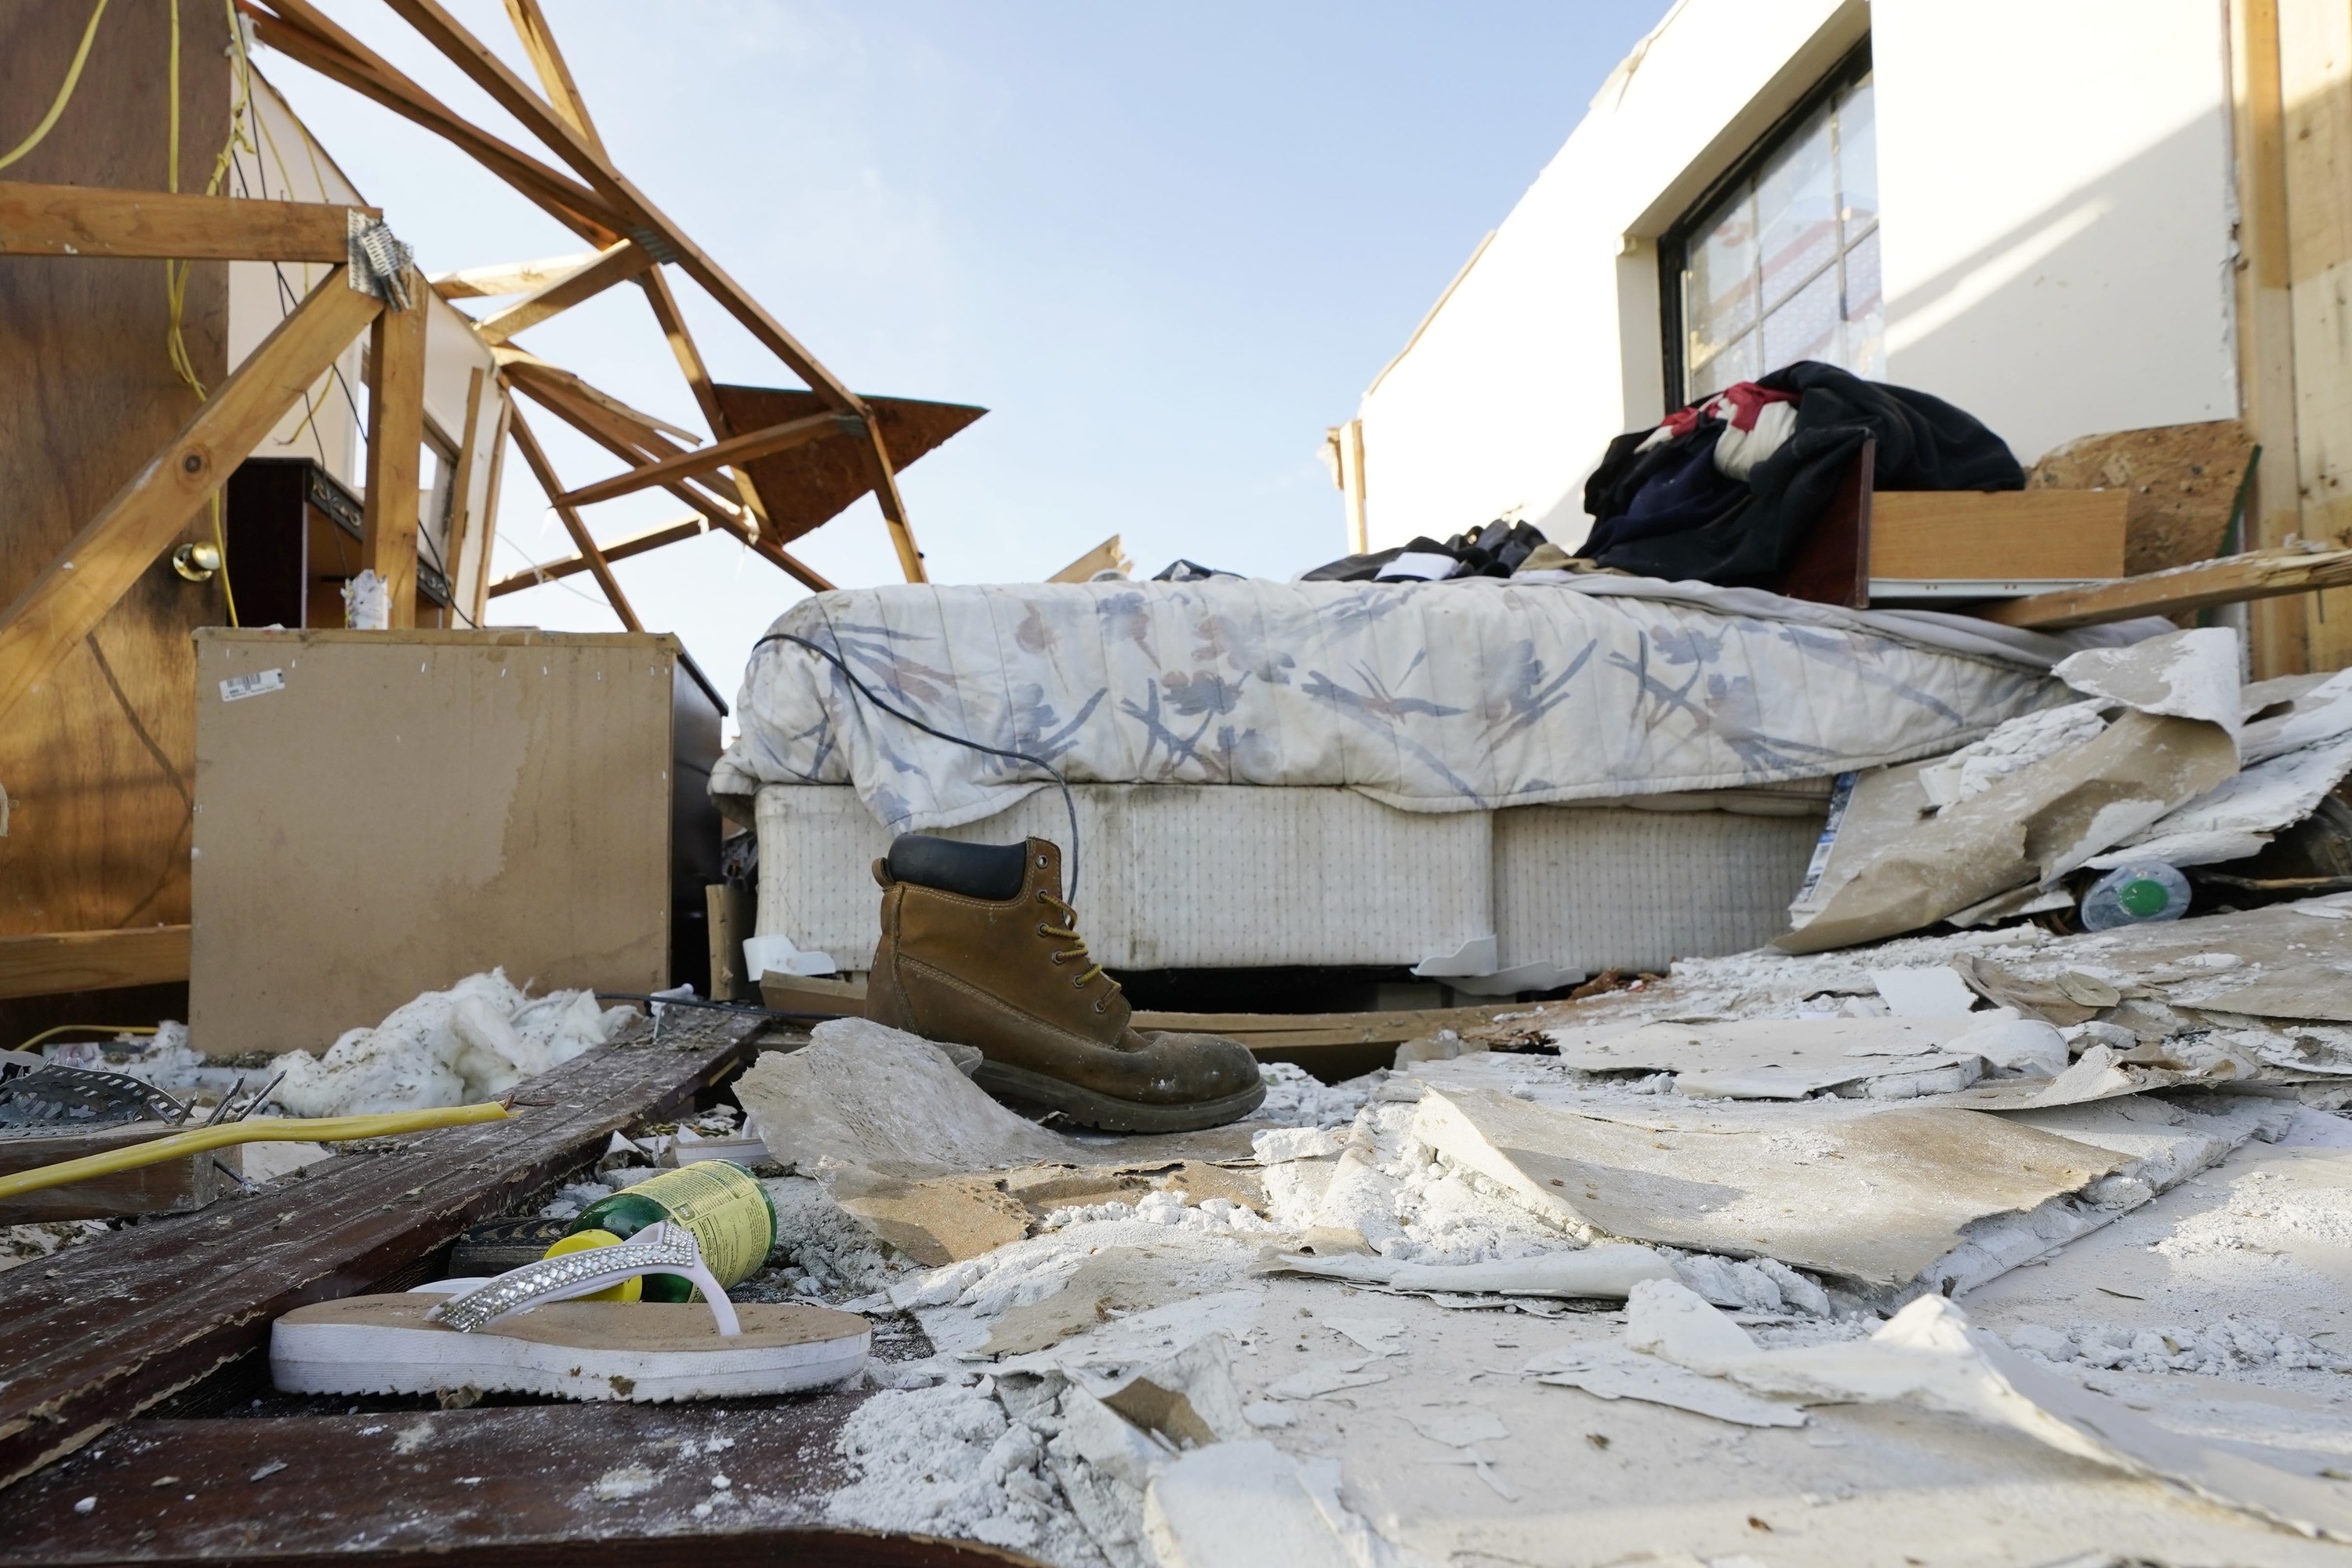 A bedroom that no longer has walls or a roof. Items have been strewn everywhere